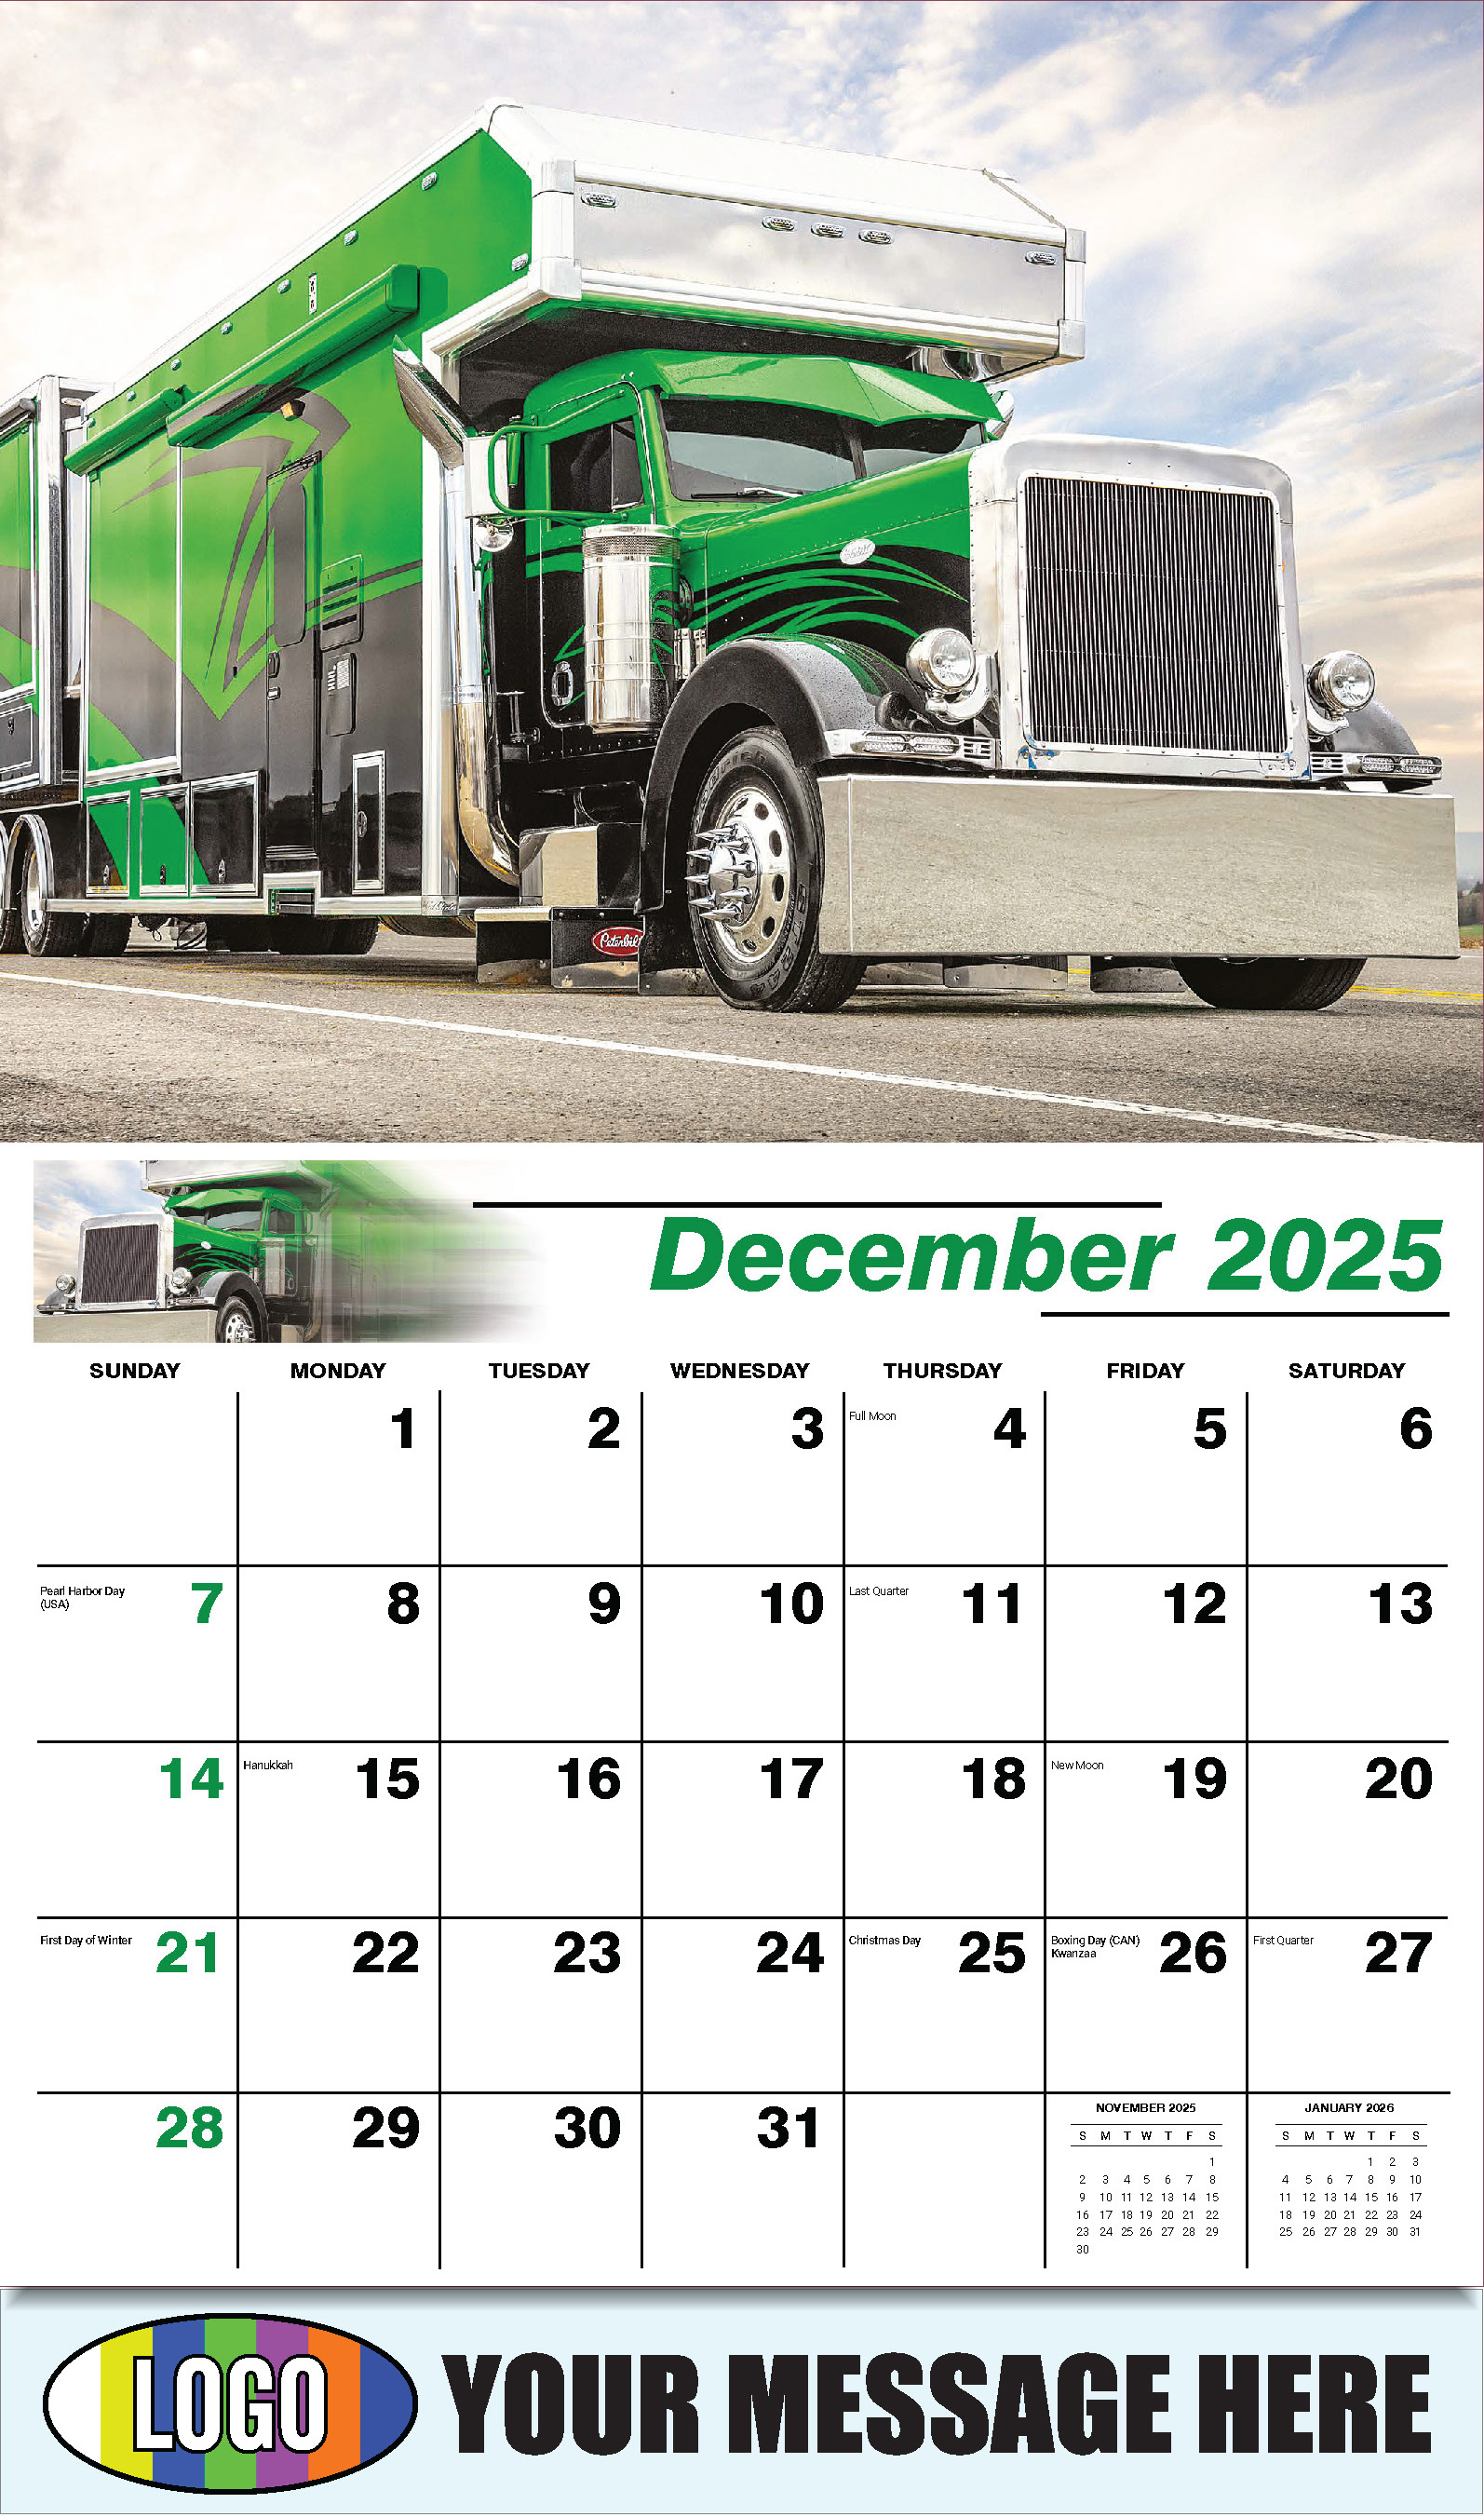 Kings of the Road 2025 Automotive Business Promotional Calendar - December